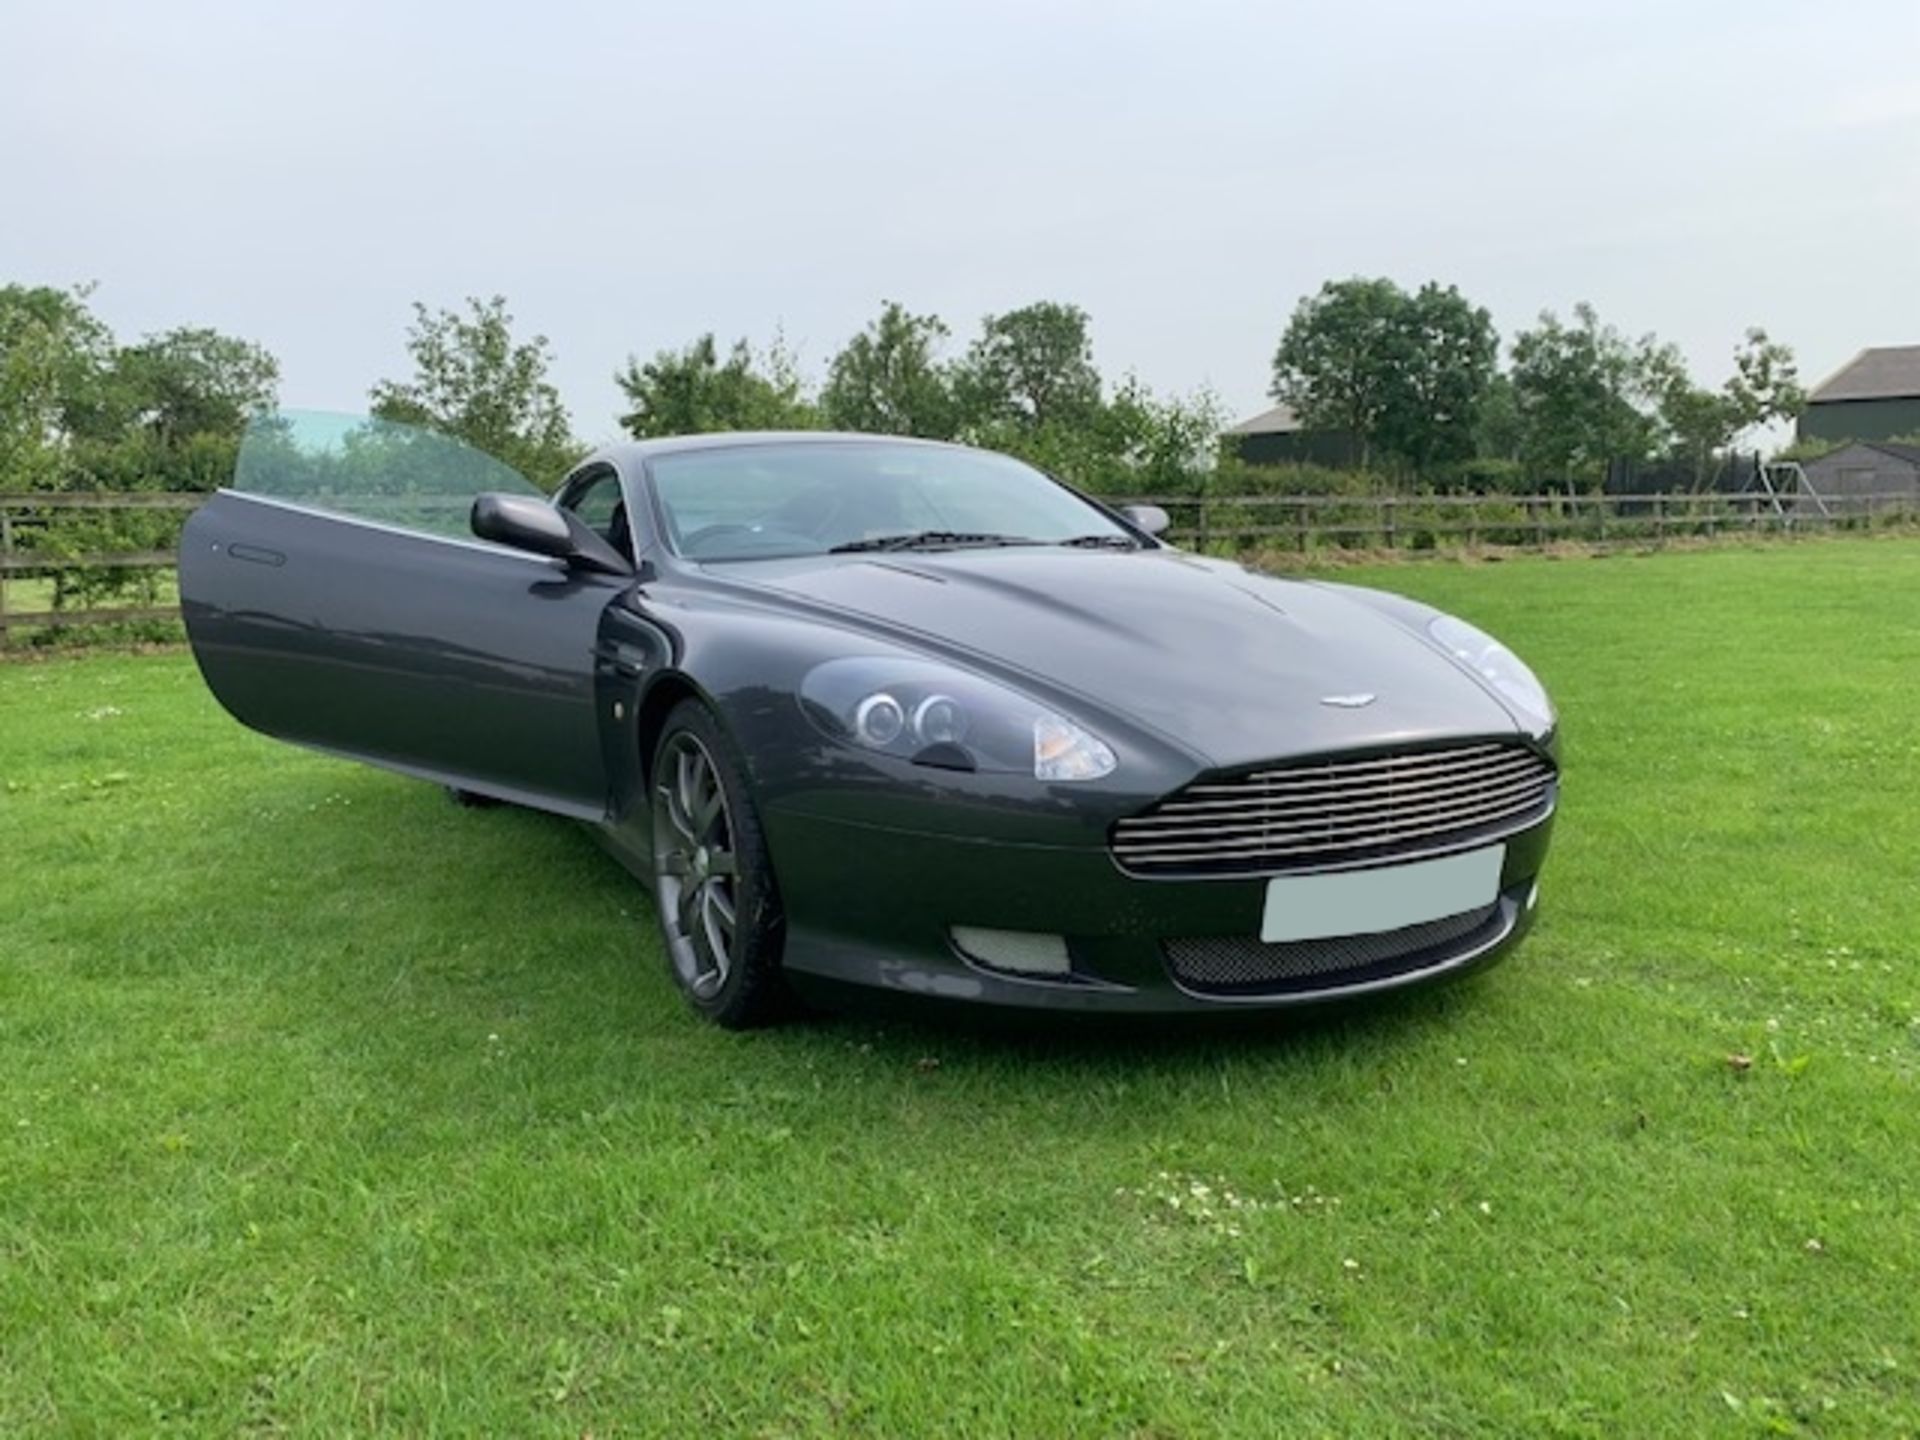 ASTON MARTIN DB9 COUPE V12 2DR TOUCHTRONIC AUTO (5935 cc) - Image 7 of 13